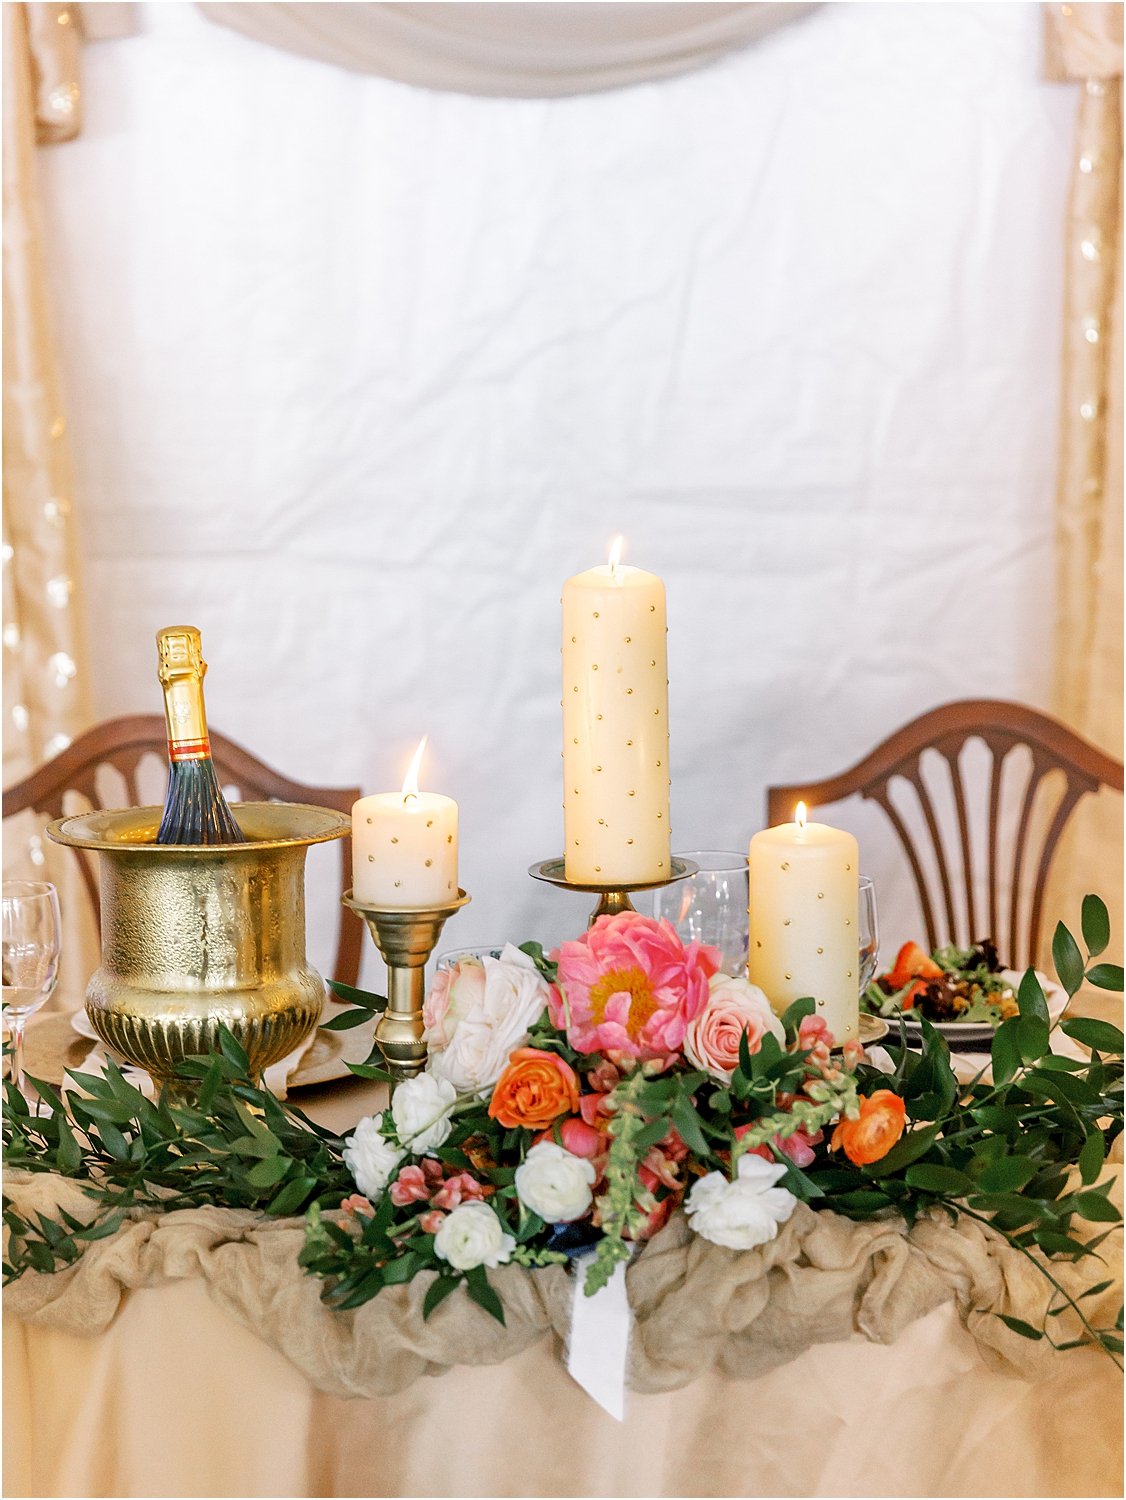 Southern charm sweetheart table summer decor